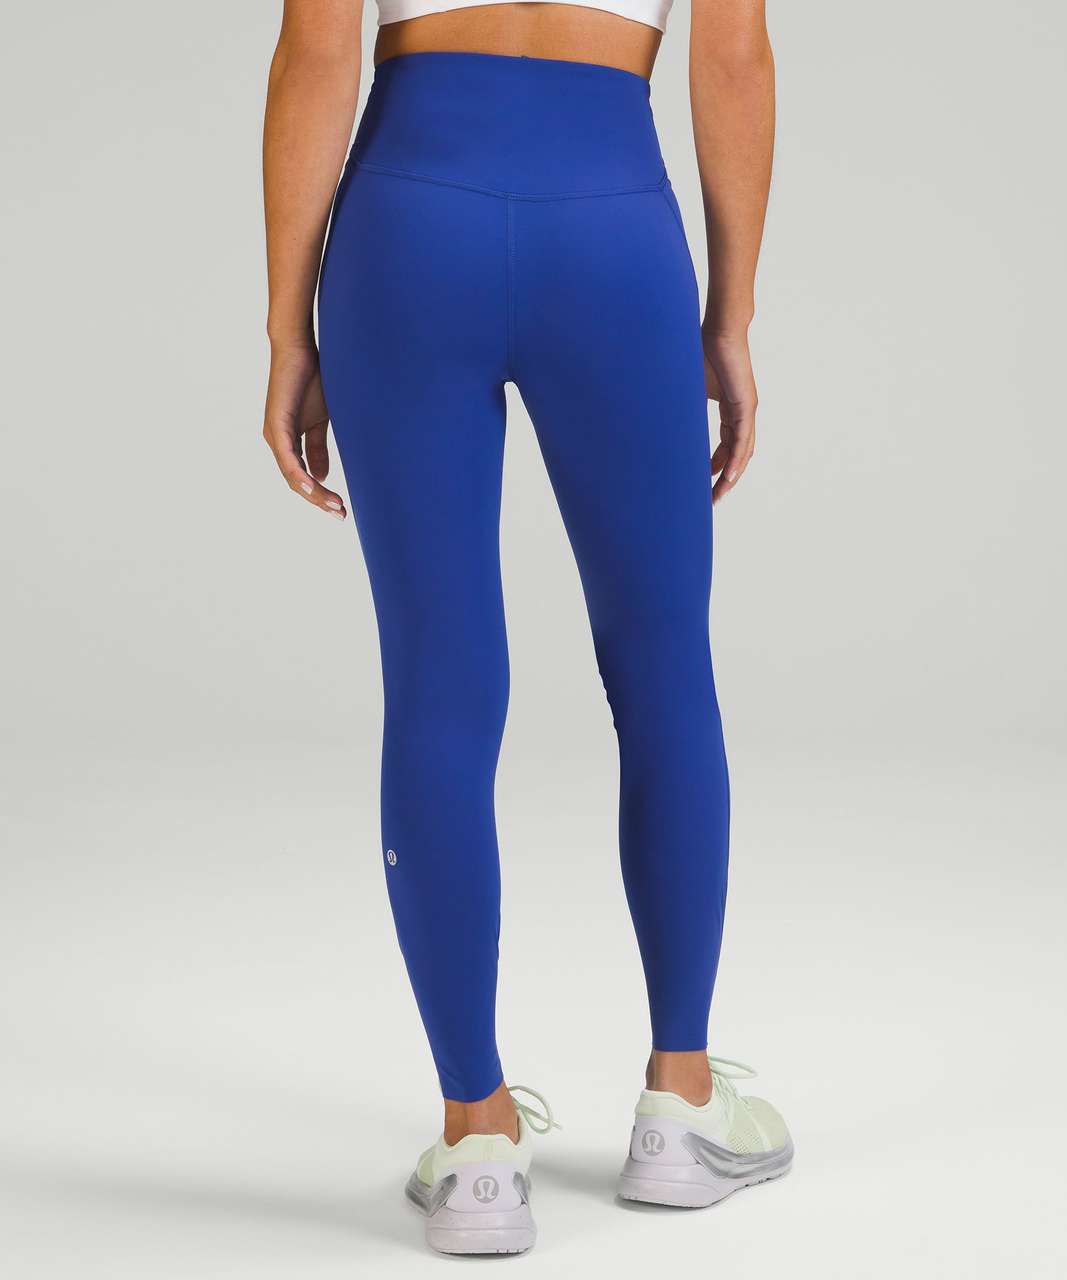 Lululemon Base Pace High-Rise Running Tight 25" - Psychic